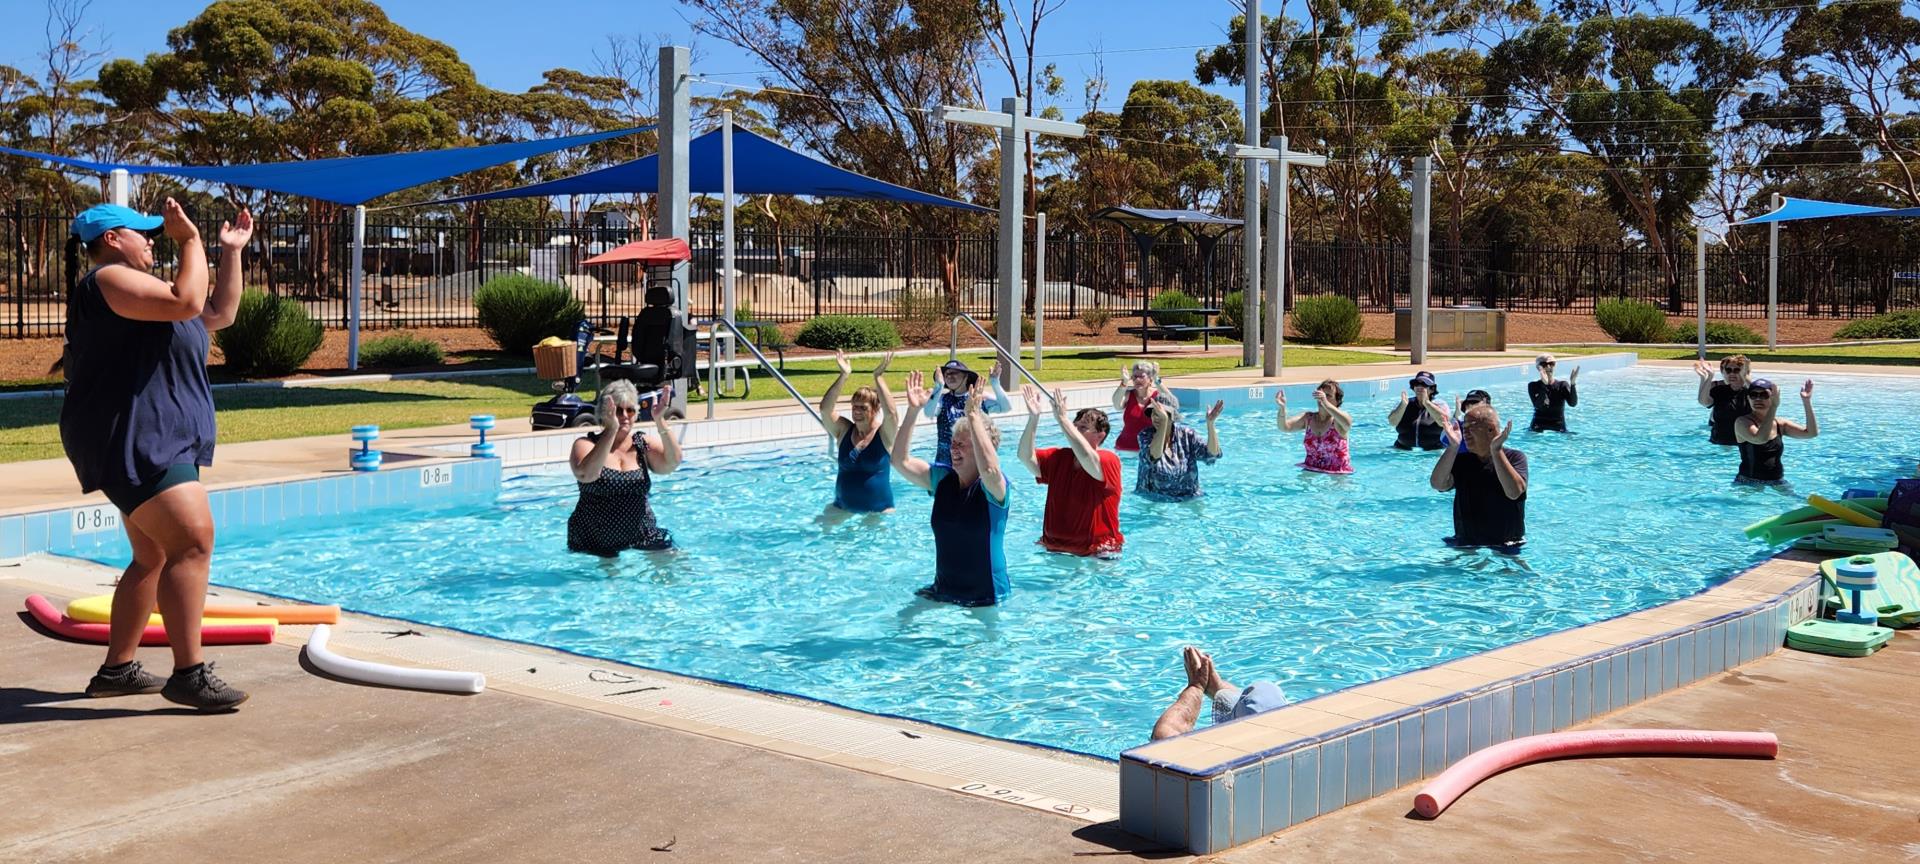 Community Pool Fitness Classes Extended and Free of Charge!